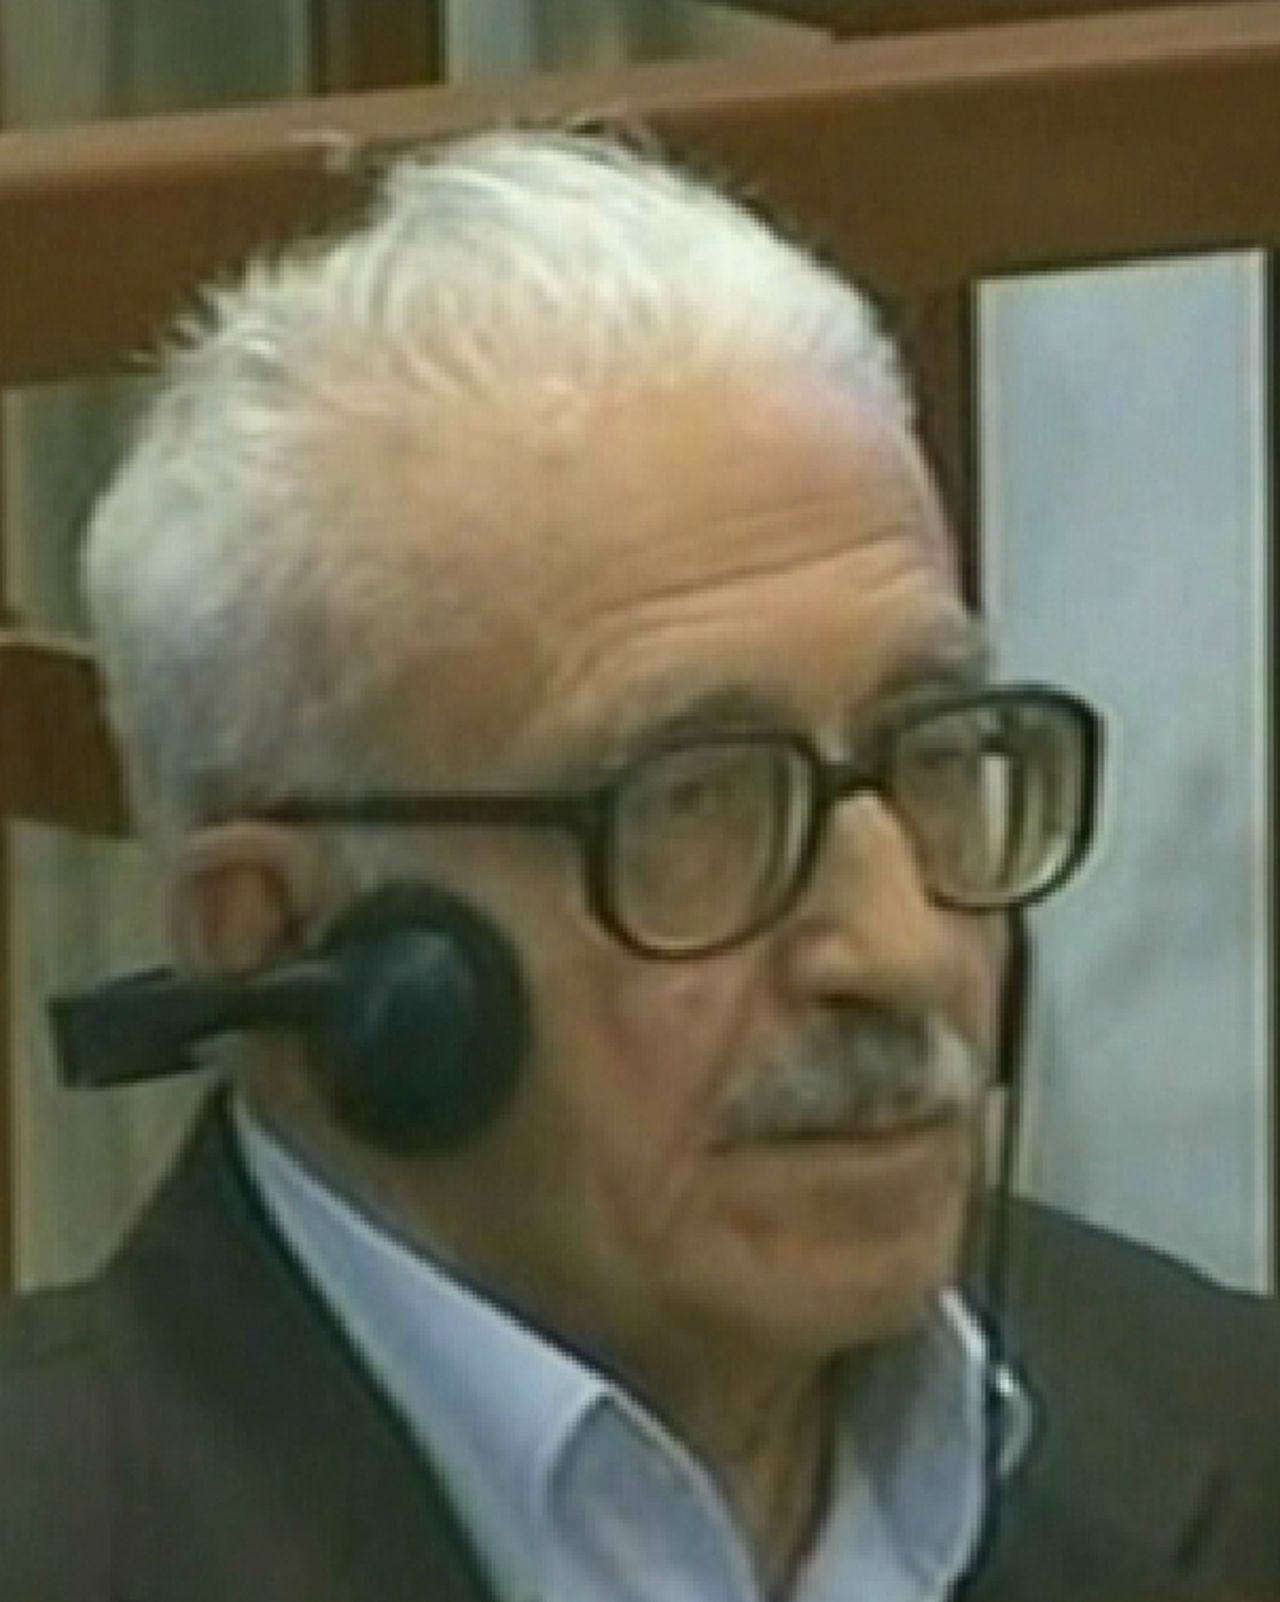 Tariq Aziz Foto AFP In This image taken from al-Iraqiya Television station on April 29 2008, Tareq Aziz, former Iraqi Deputy Prime Minister and the international face of hanged Iraqi president Saddam Hussein's regime, is seen sitting in the dock at an undisclosed location in Baghdad. Along with six other defendants, Aziz went on trial today on charges of executing 42 Baghdad businessmen in 1992 that could see him sentenced to death